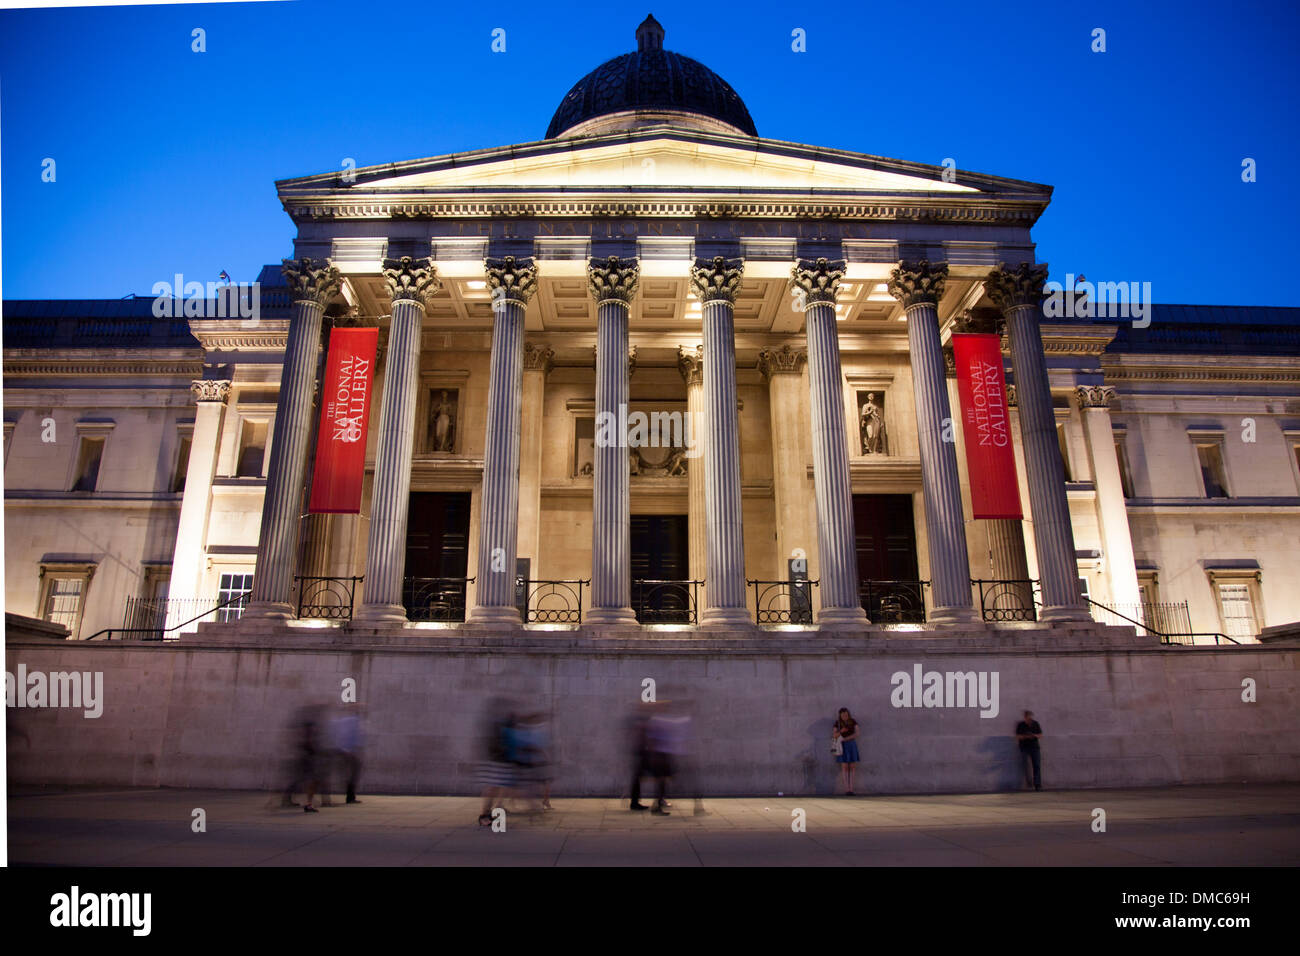 The National Gallery at dusk, London, UK Stock Photo